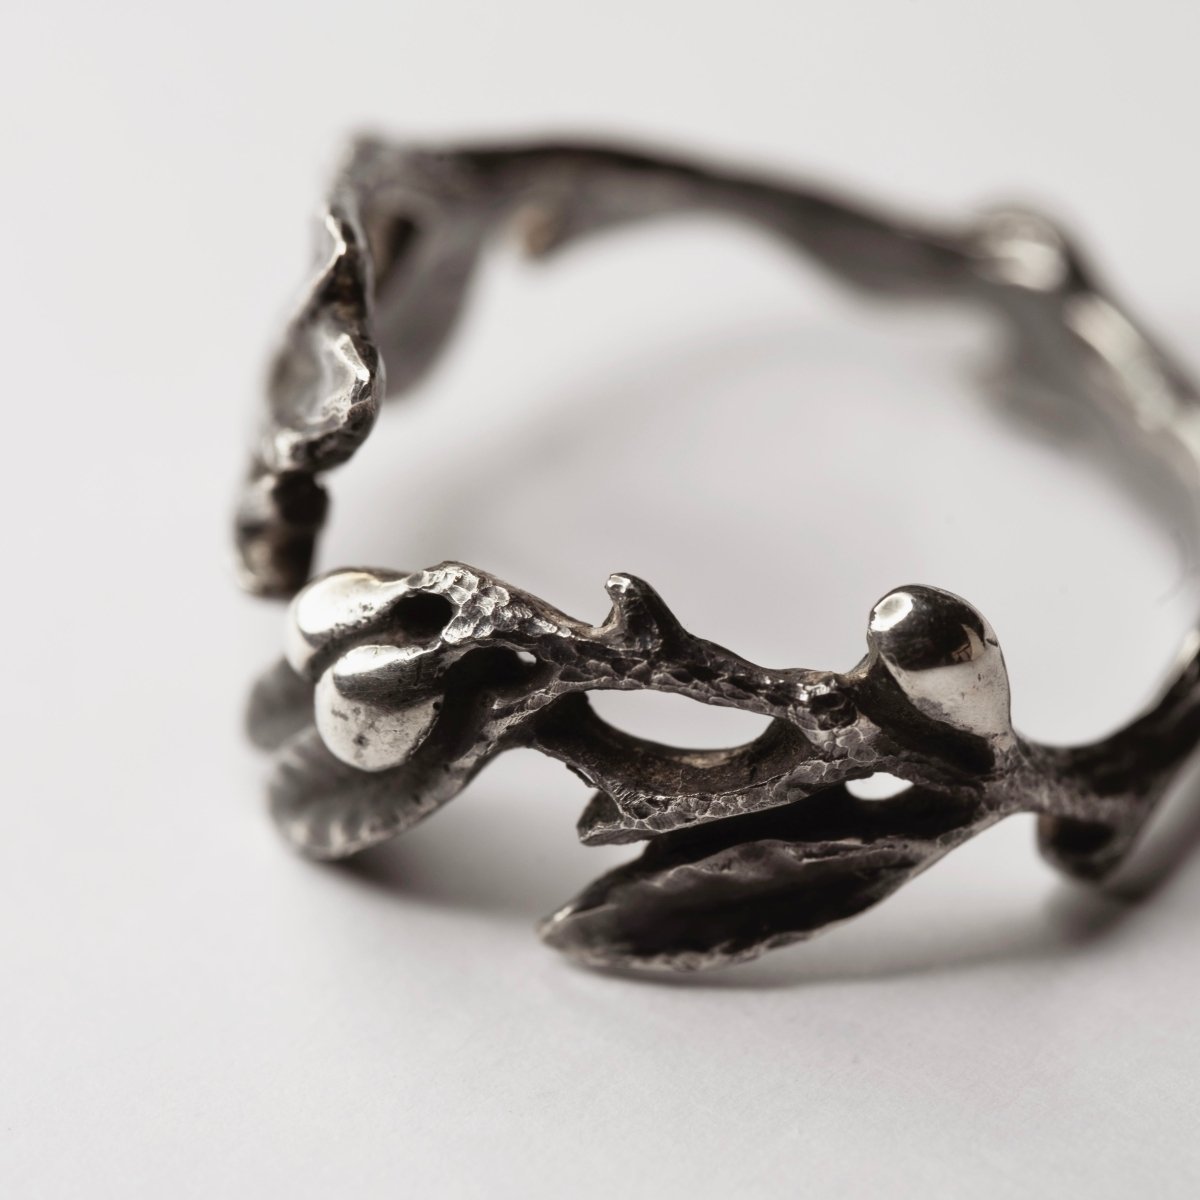 Olive Branch ring - Macabre Gadgets